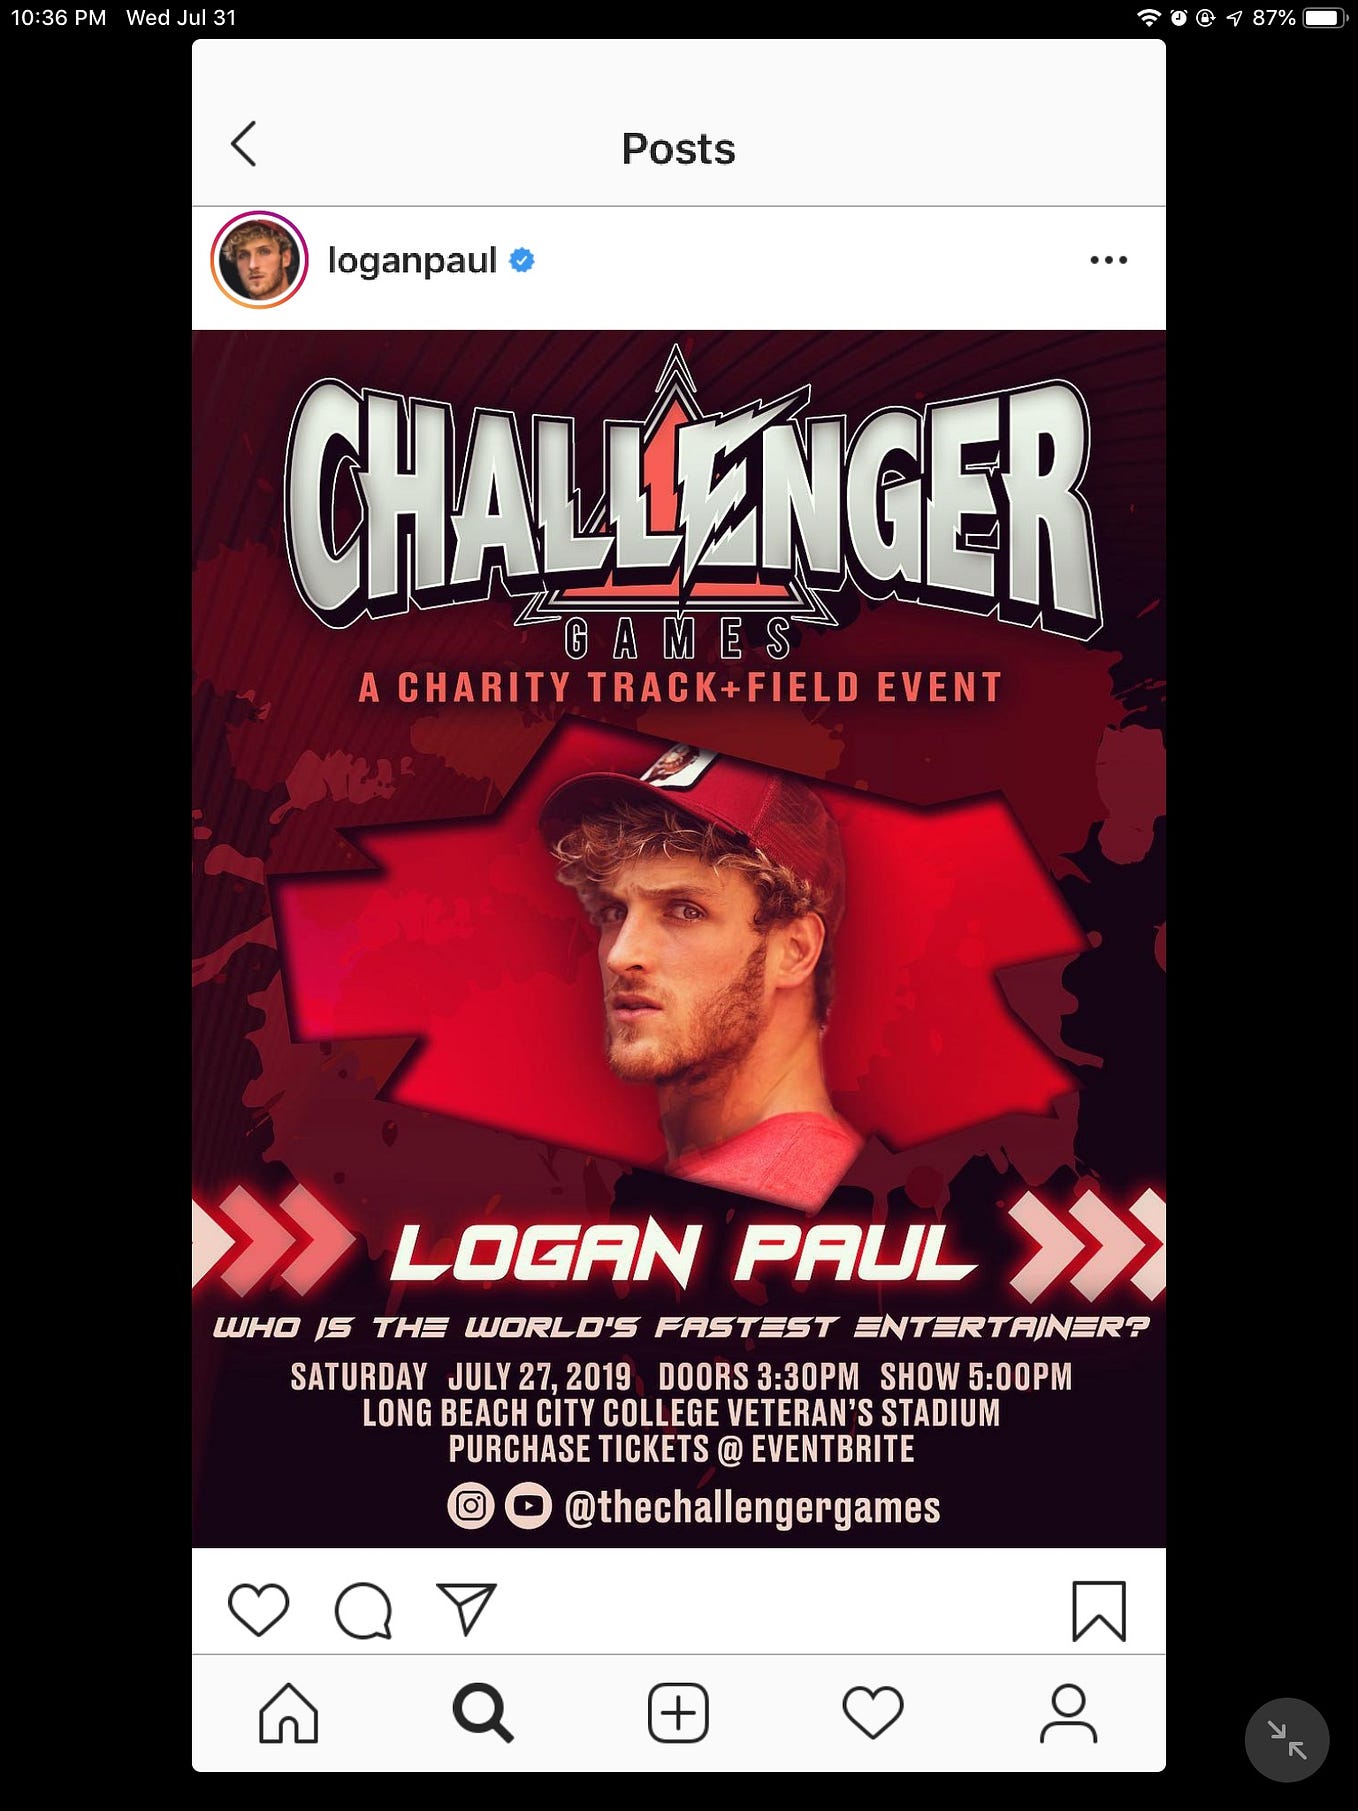 Challenger Games uses Social Media Influencer Logan Paul to Raise Money for  the Special Olympics, by Daniel Romero